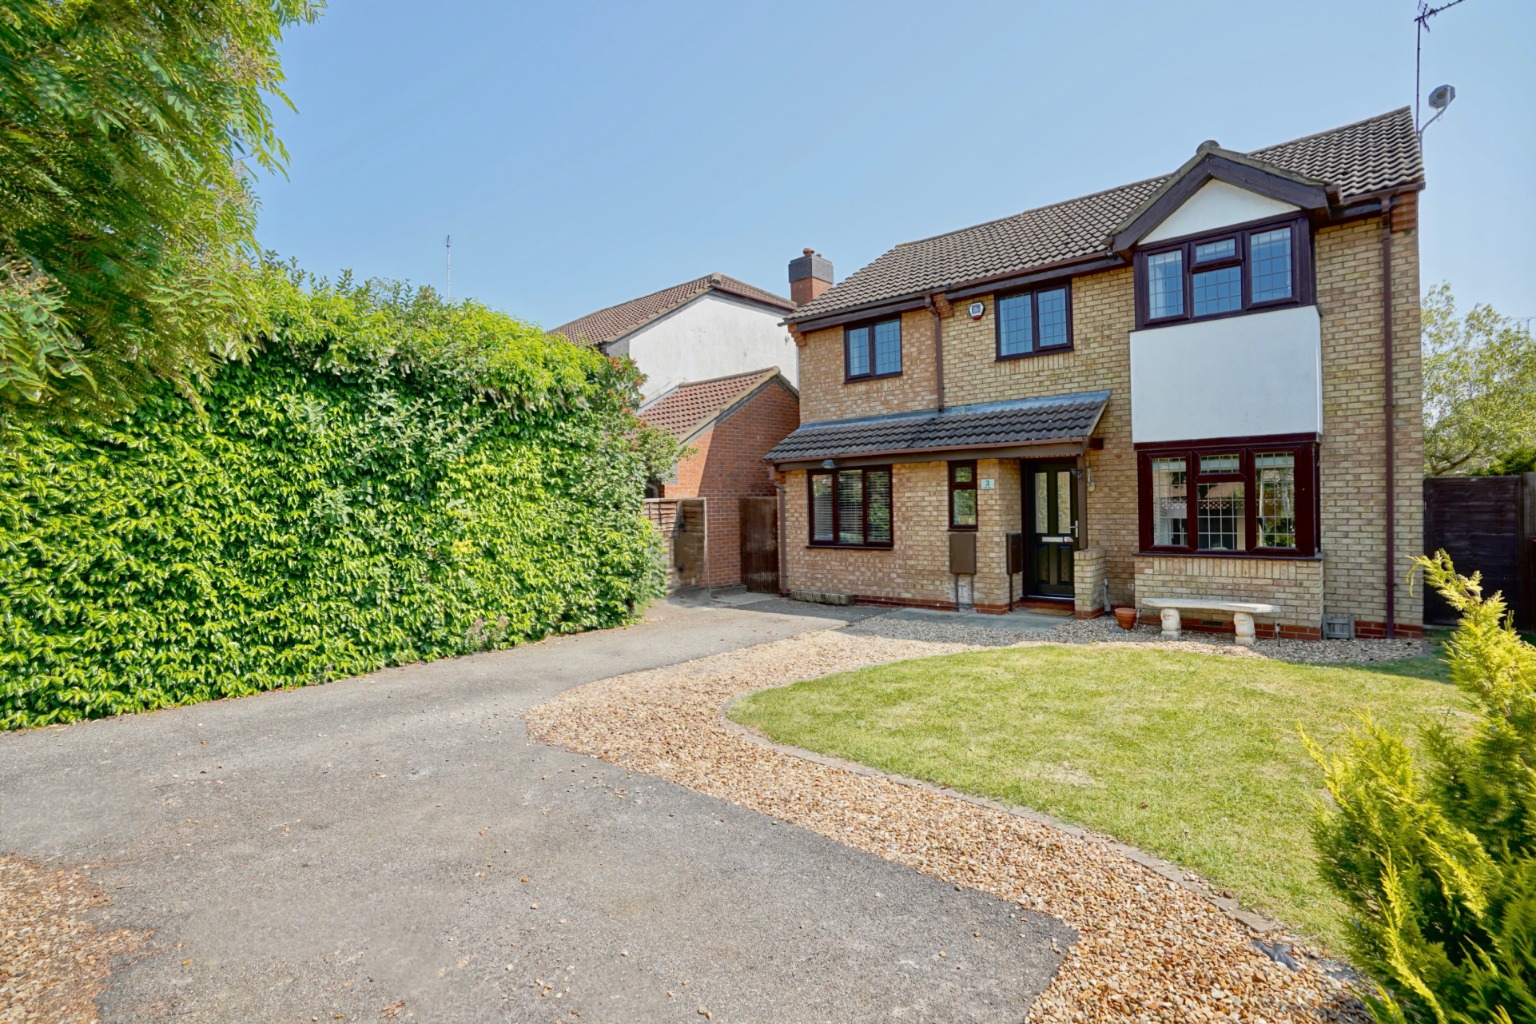 4 bed detached house for sale in Lake Way, Huntingdon - Property Image 1